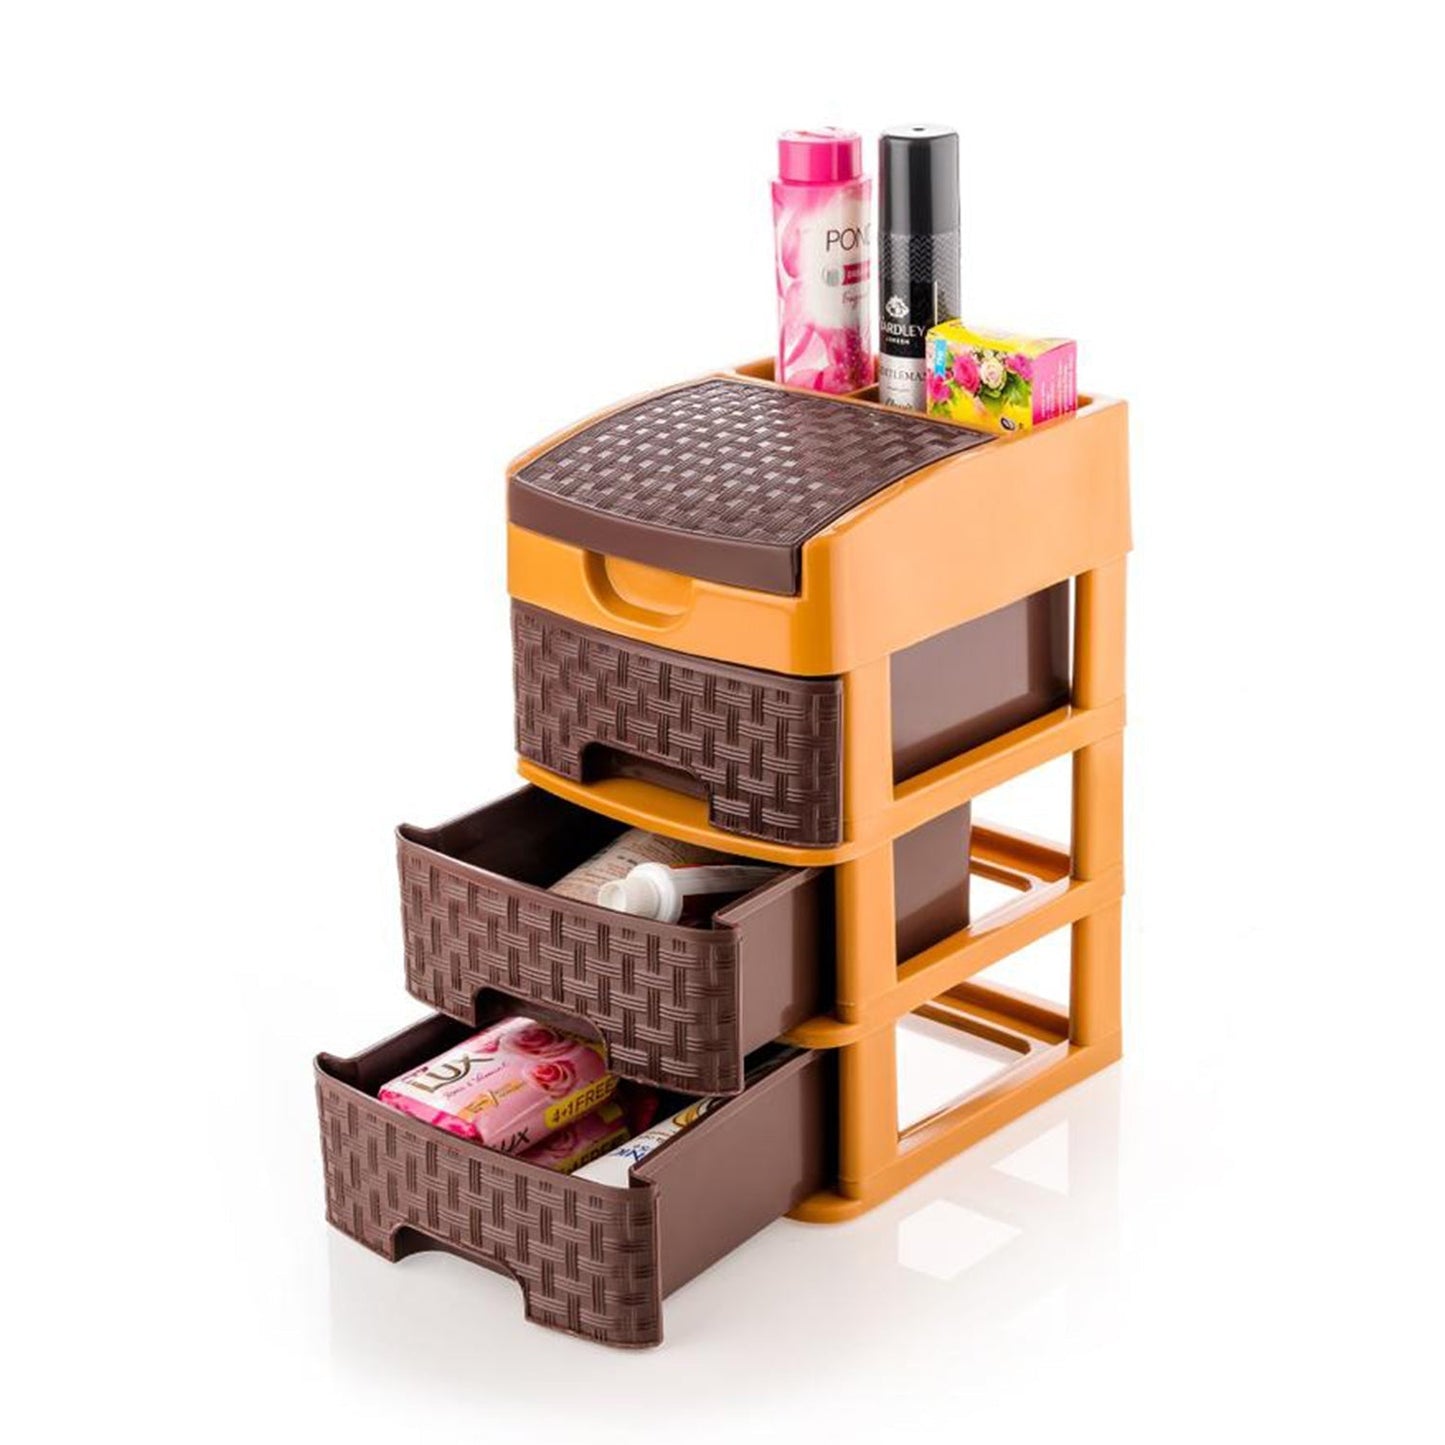 Mini 3 Layer D Storage for storing of various types of stuffs and items